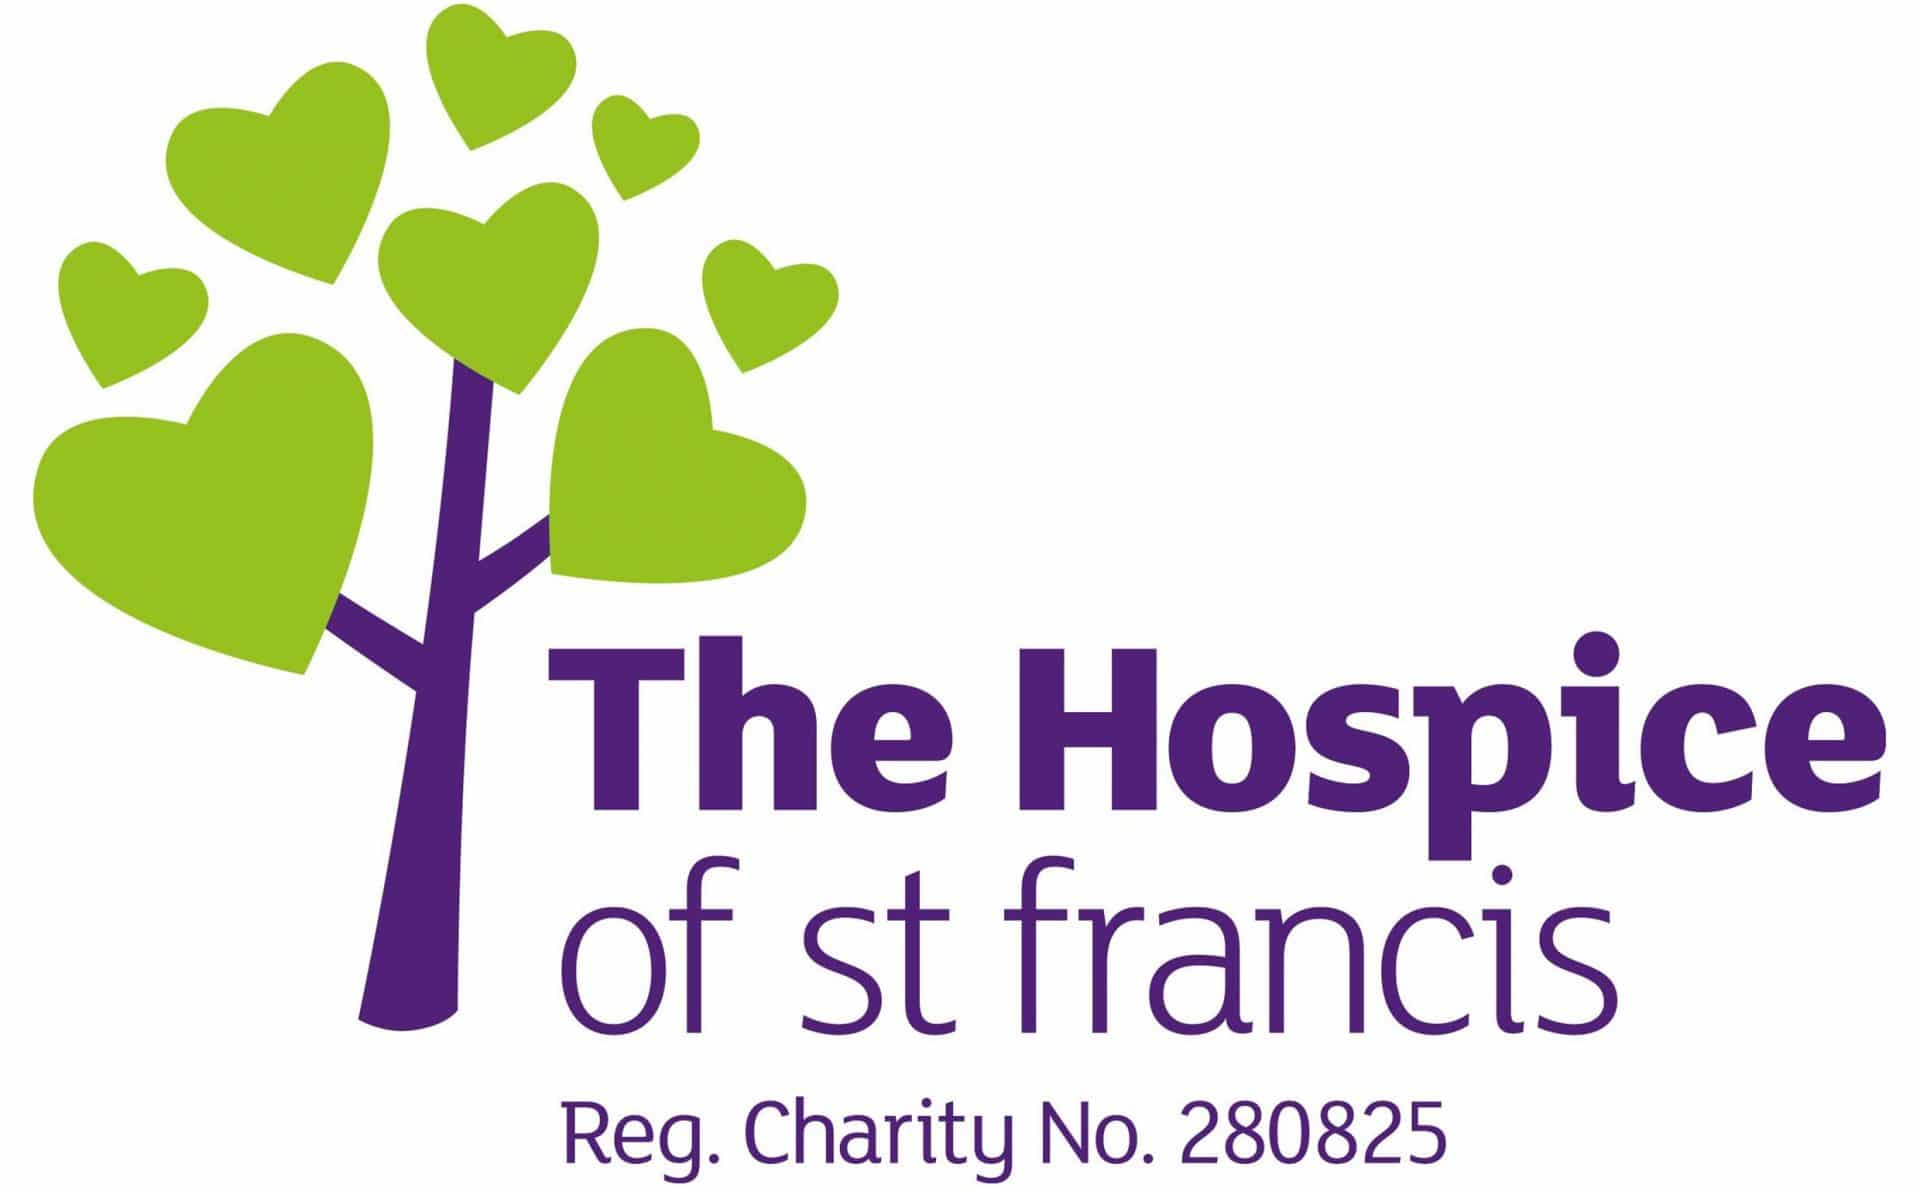 The Hospice of st francis logo